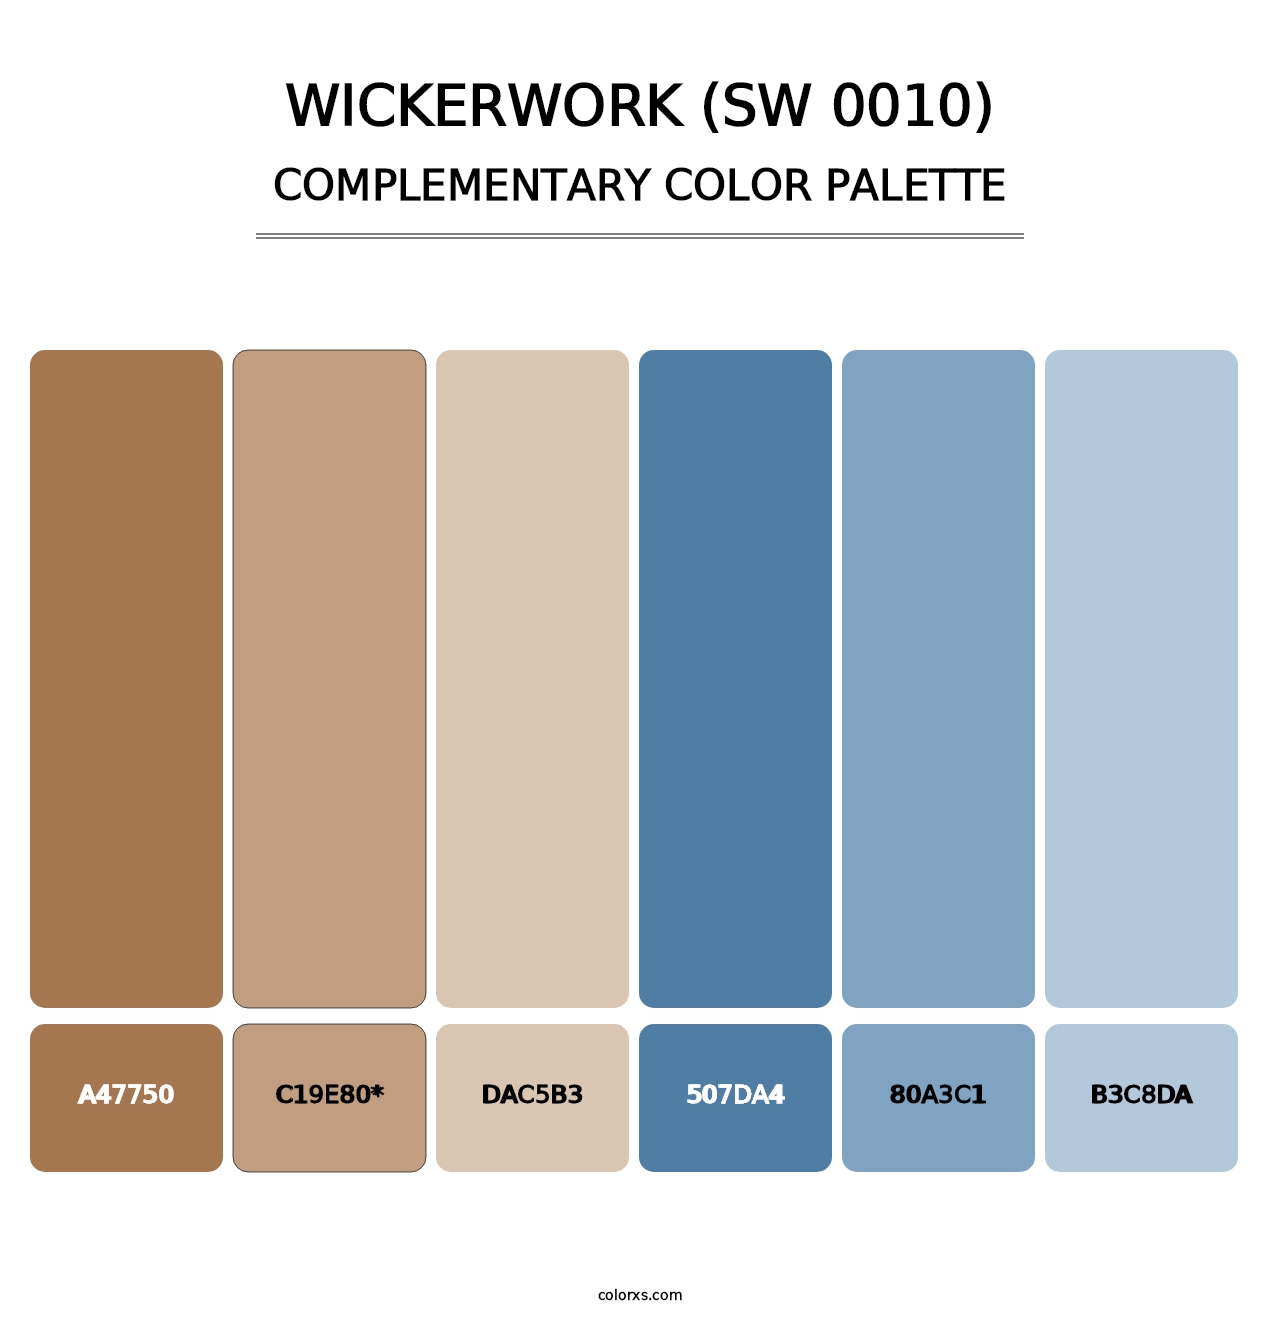 Wickerwork (SW 0010) - Complementary Color Palette